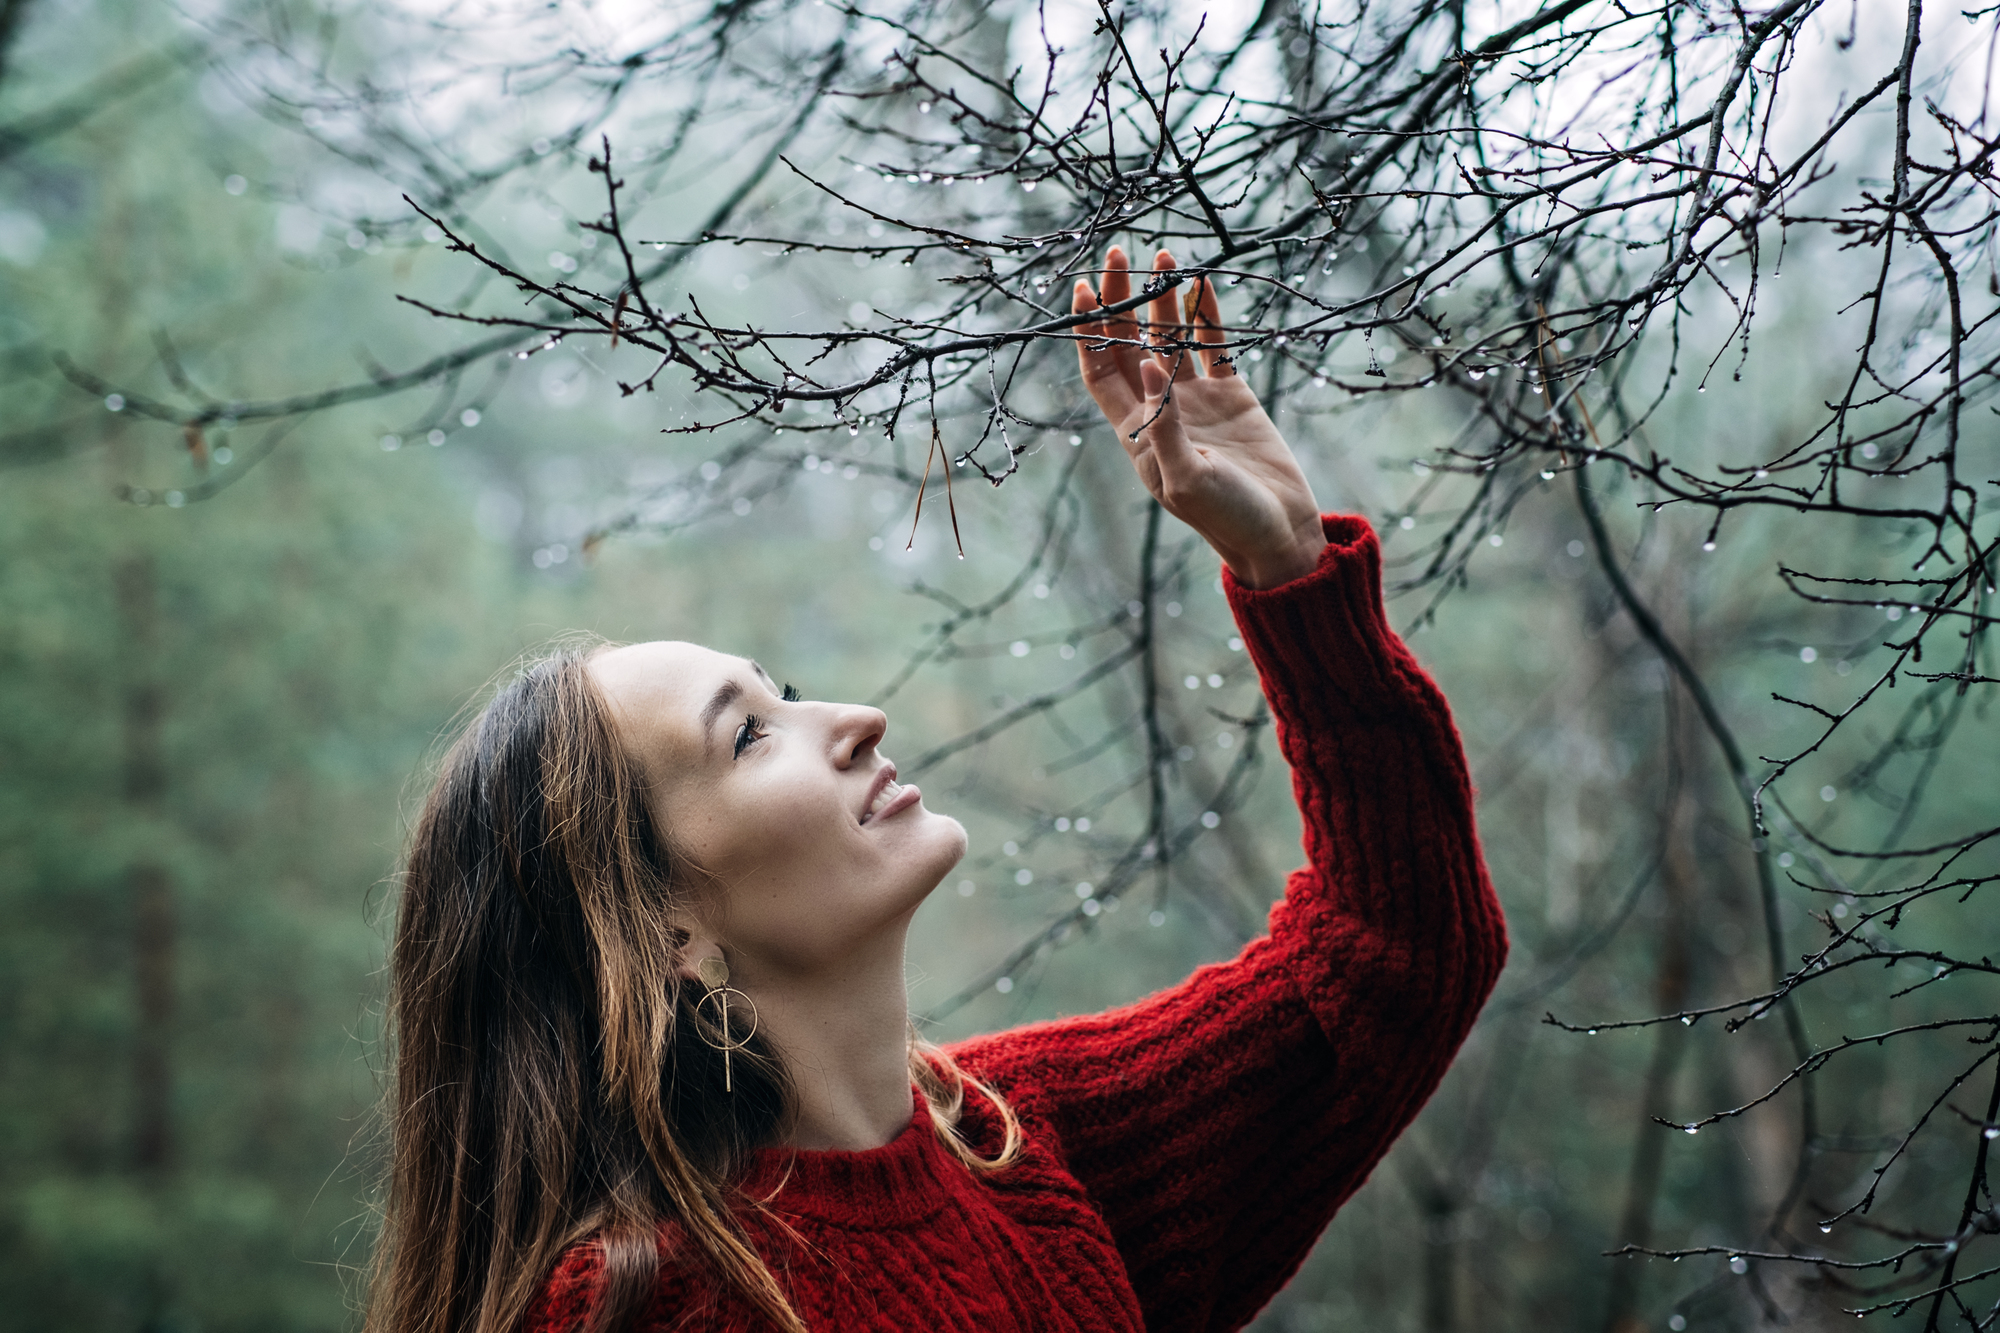 A woman admiring a tree with water drops